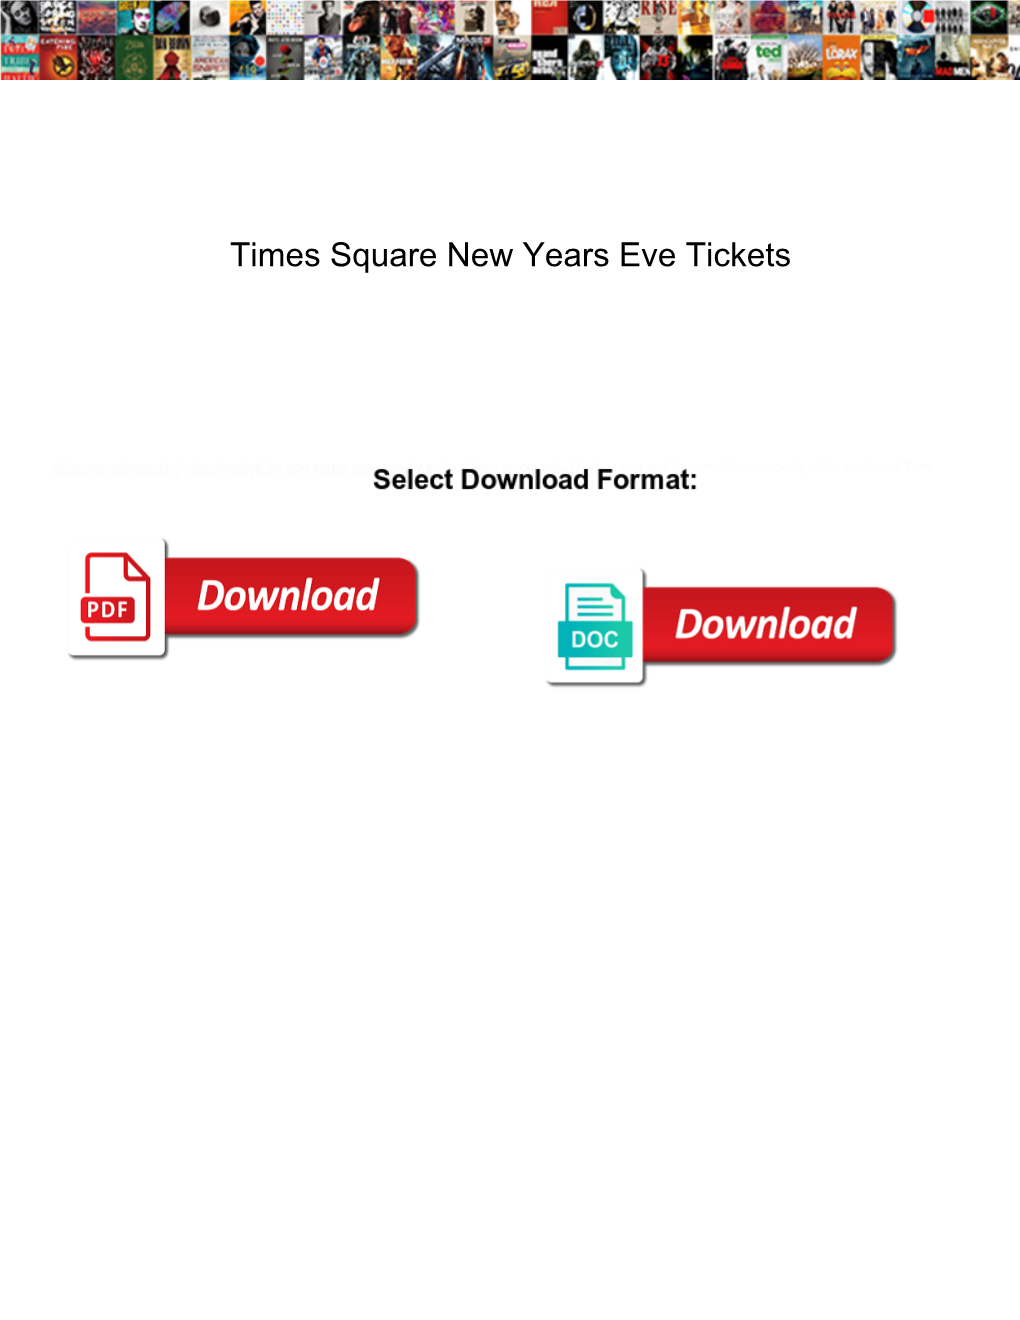 Times Square New Years Eve Tickets